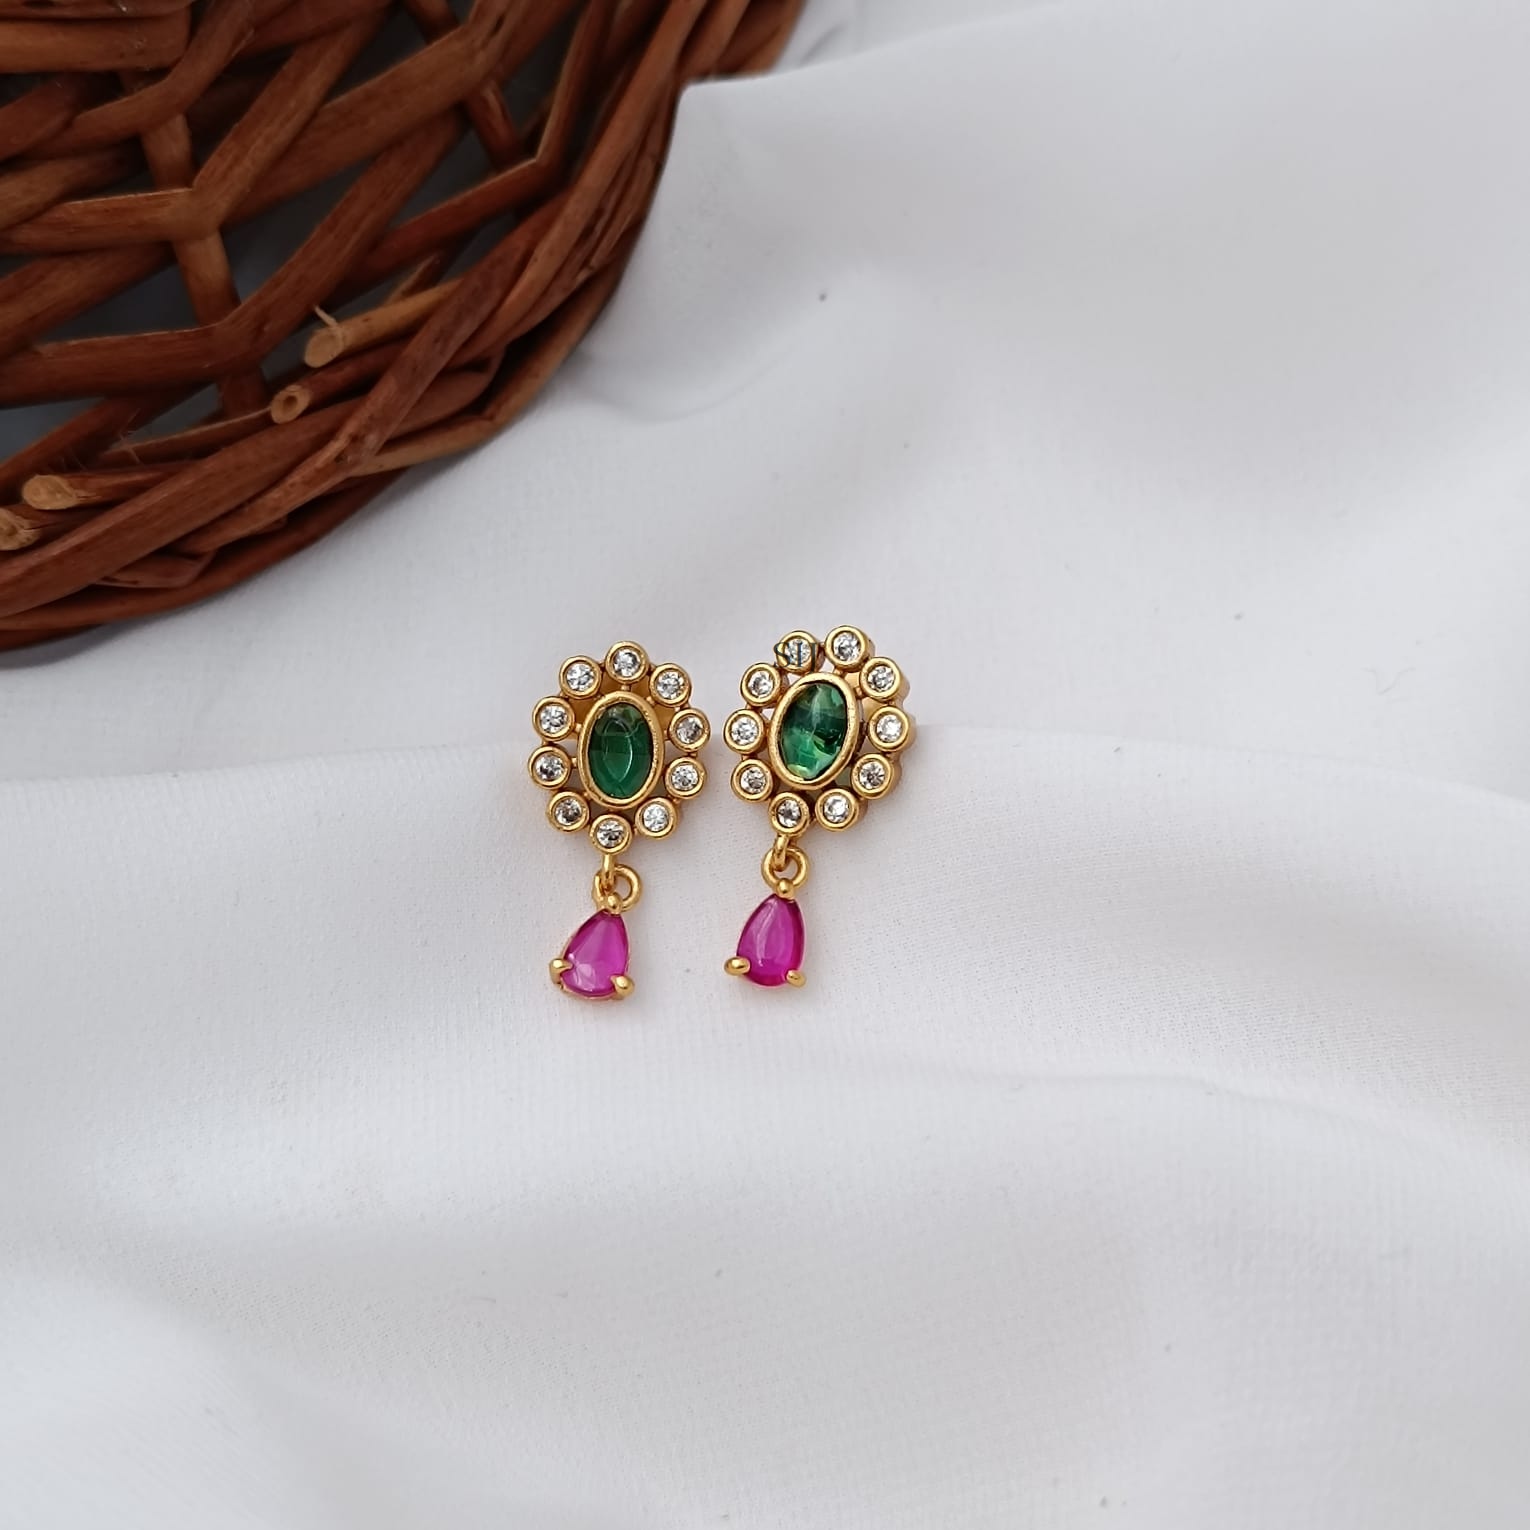 Cute Oval Green Stone and White Stones Earrings